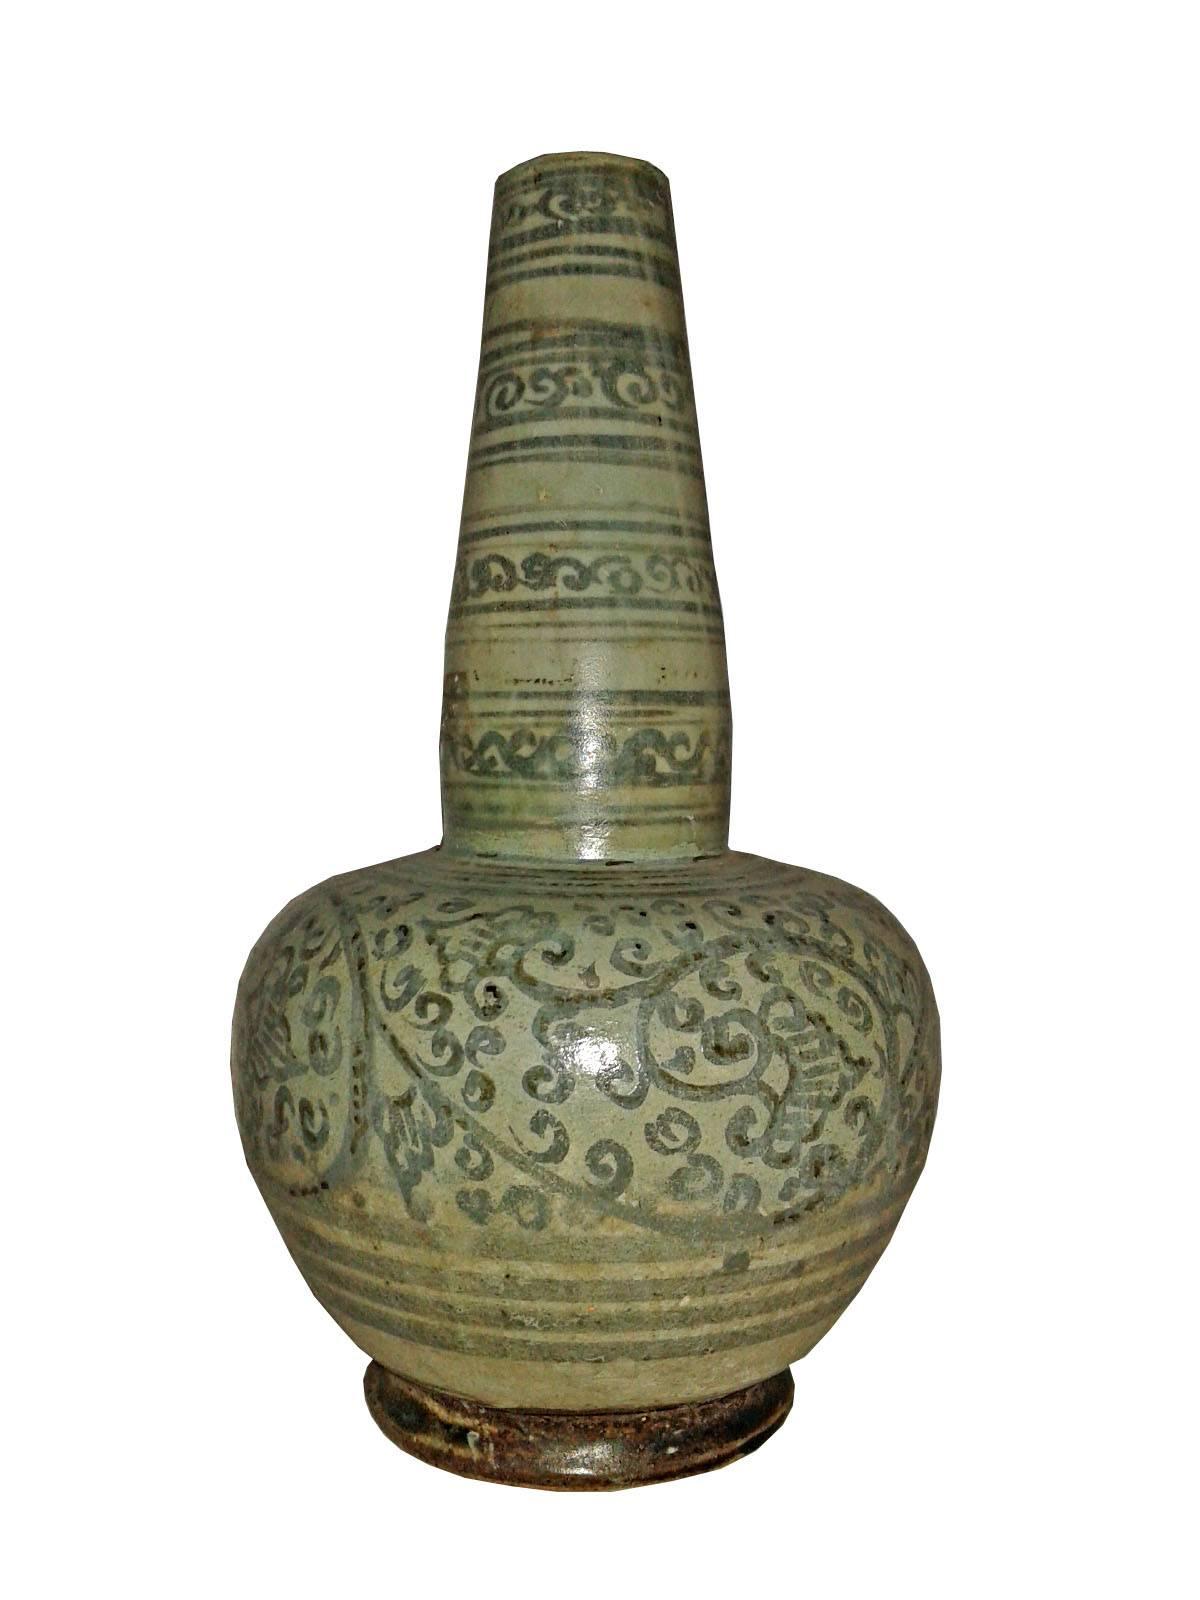 Five ceramic Thai green vases in Celadon jade-tone, crackled finish. Several sizes, tones and decoration. Excellent accents for any table, with an exotic touch. Excellent vintage condition.

Measurements and price are for the largest piece. For any